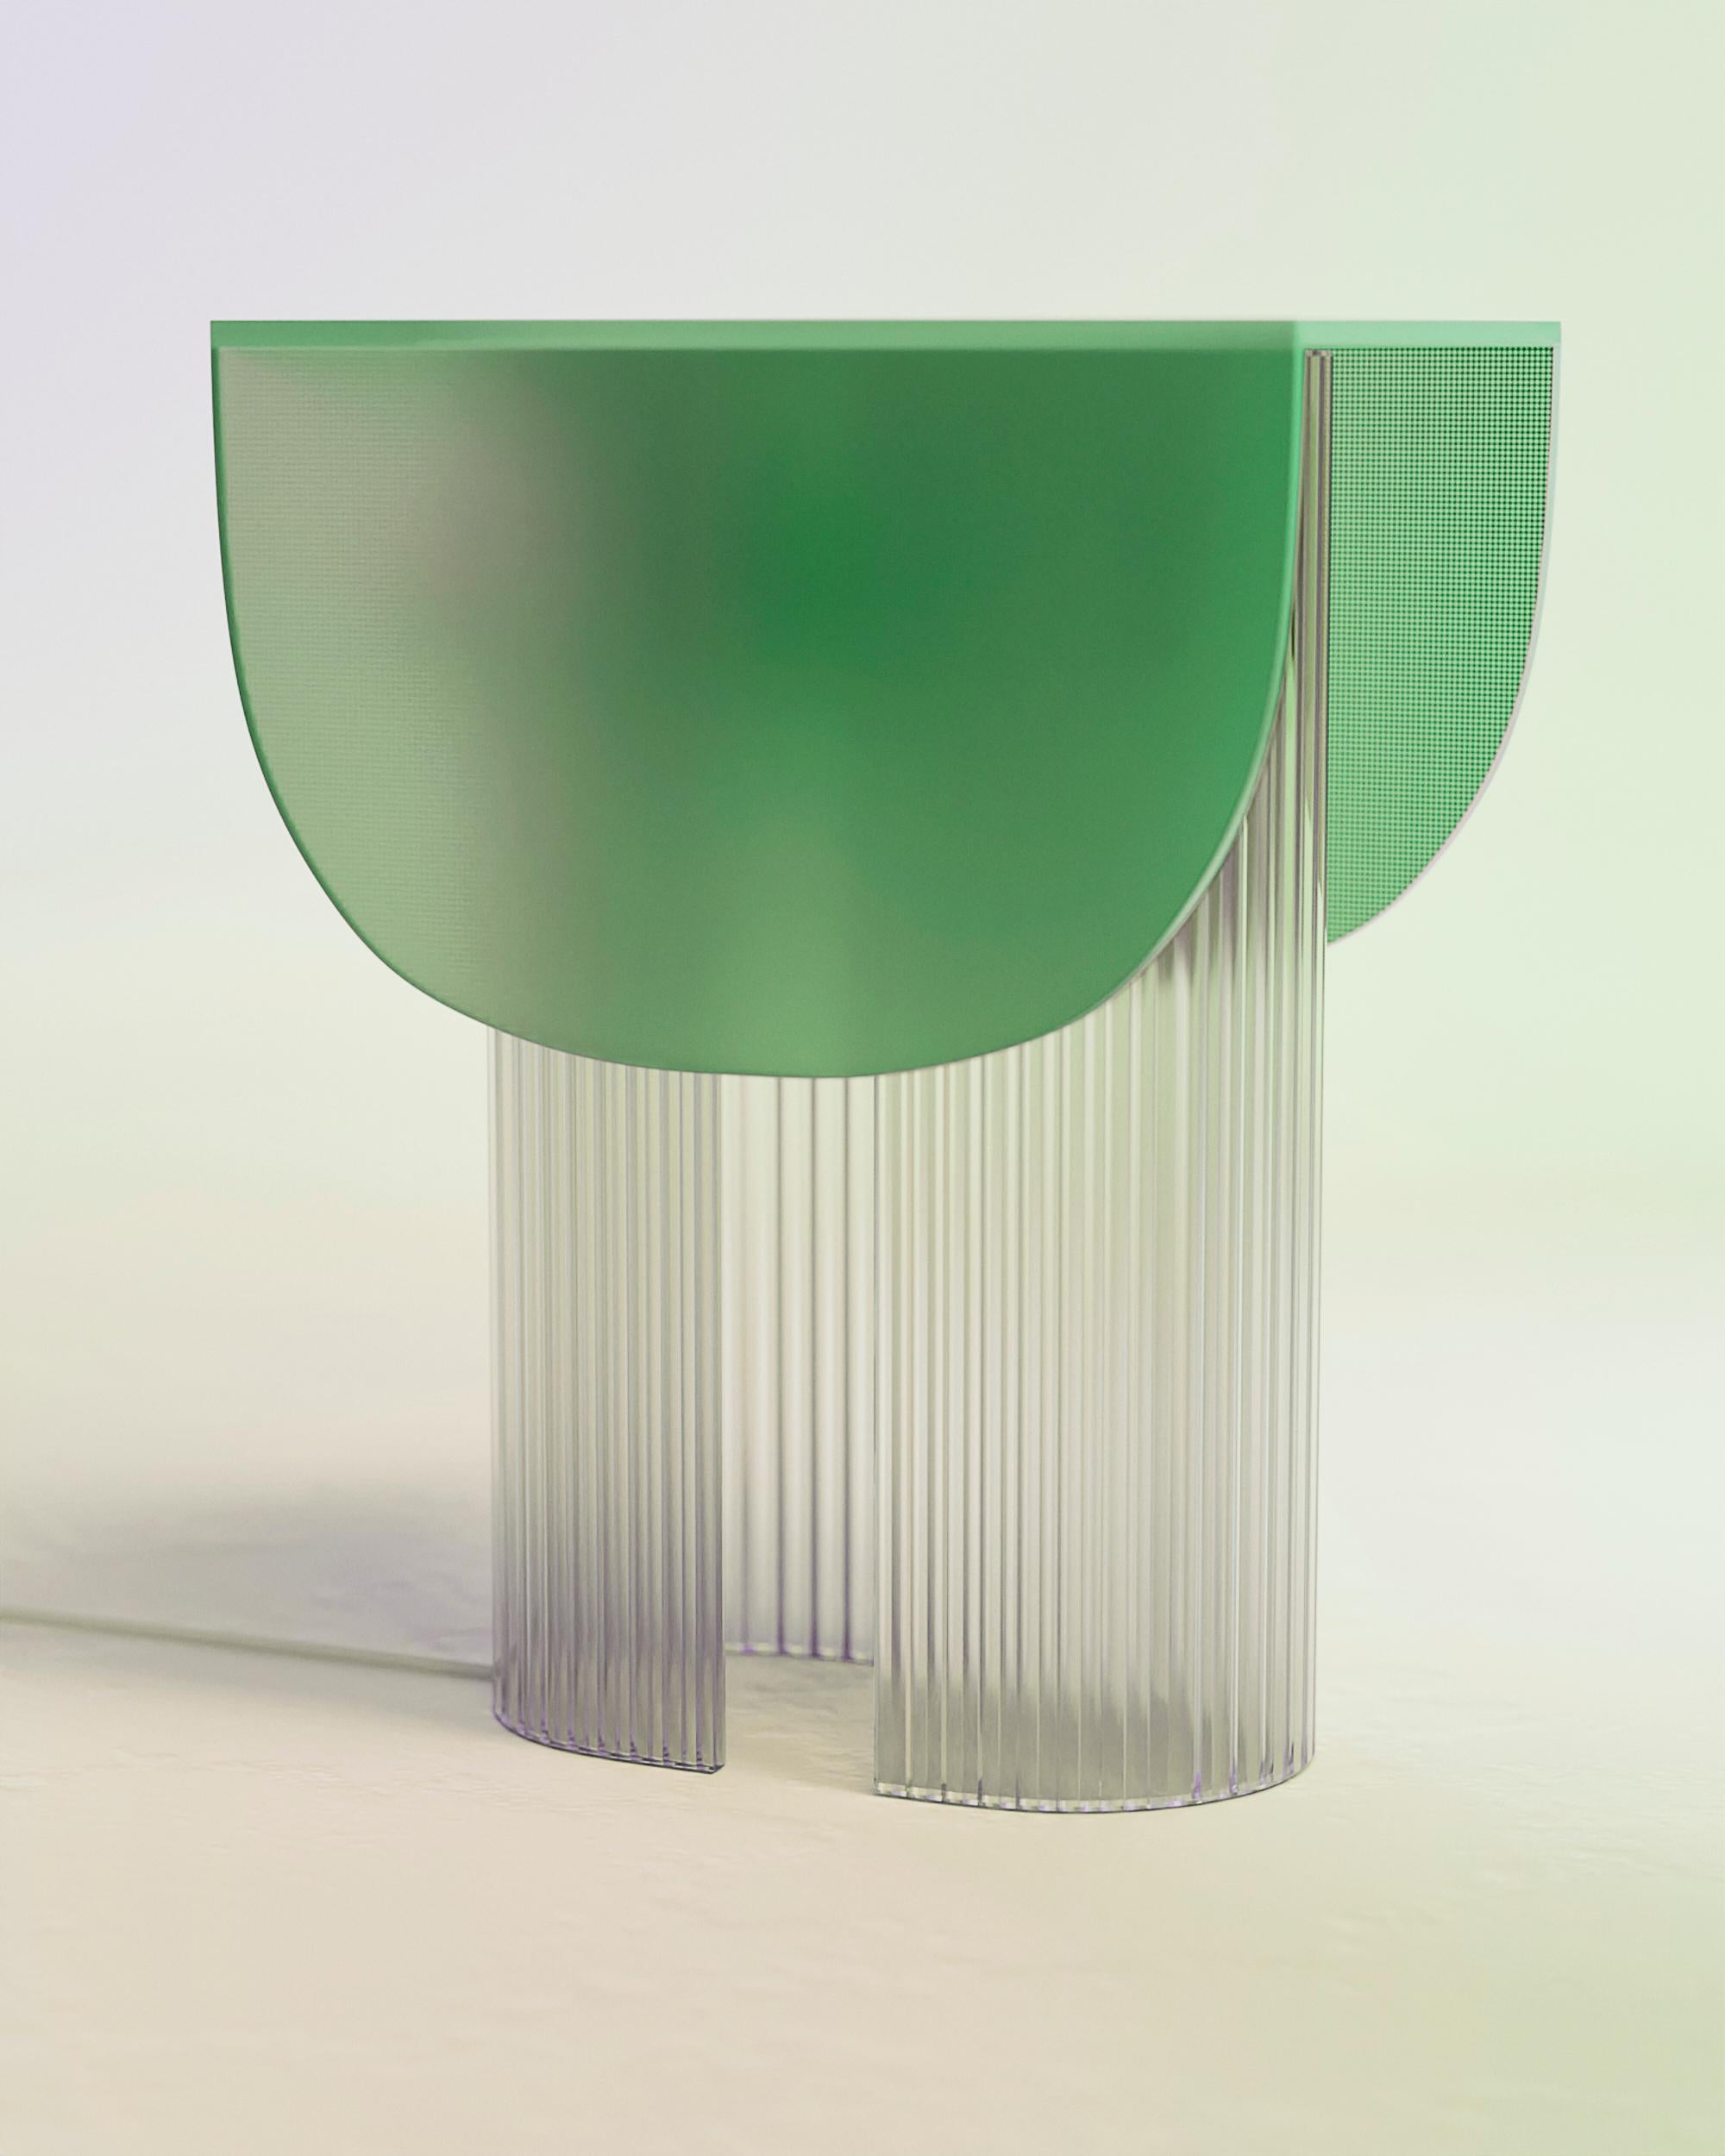 Nature Green Helia Table Lamp by Glass Variations
Dimensions: W 22 x D 31 x H 40 cm
Materials: Glass.

With this 100% glass table lamp Bina Baitel celebrates light and sun. Its curved patterned glass structure and the satin finished glass cap